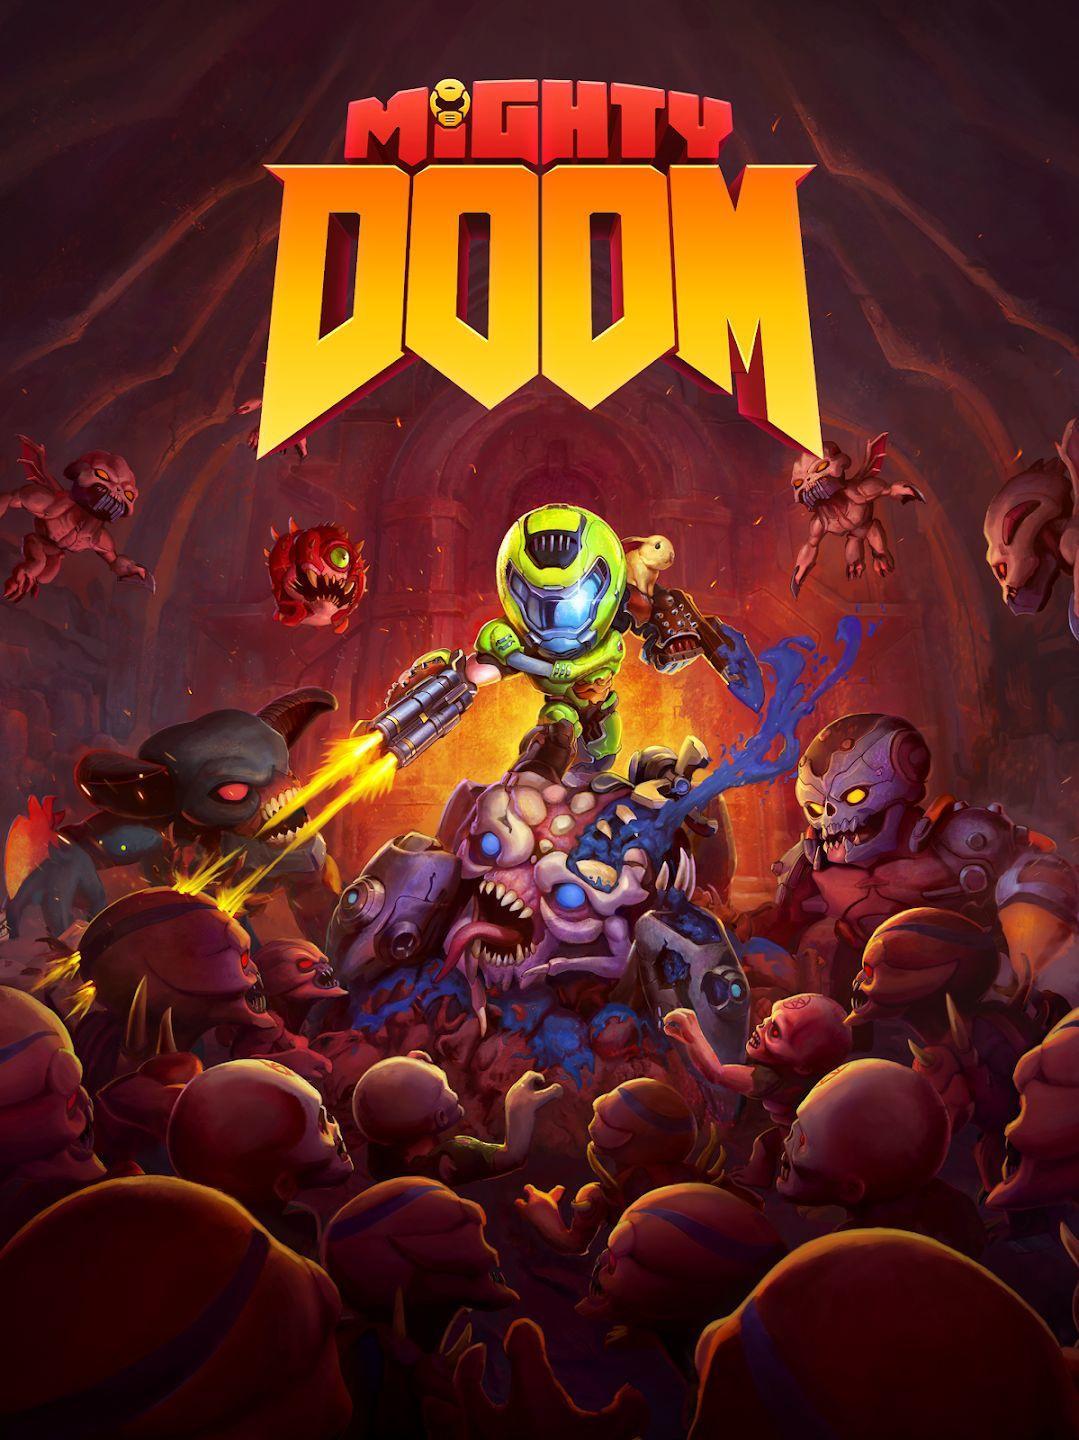 Bethesda announced the launch of Mighty Doom, a mobile game derived from Destroyer, on March 21